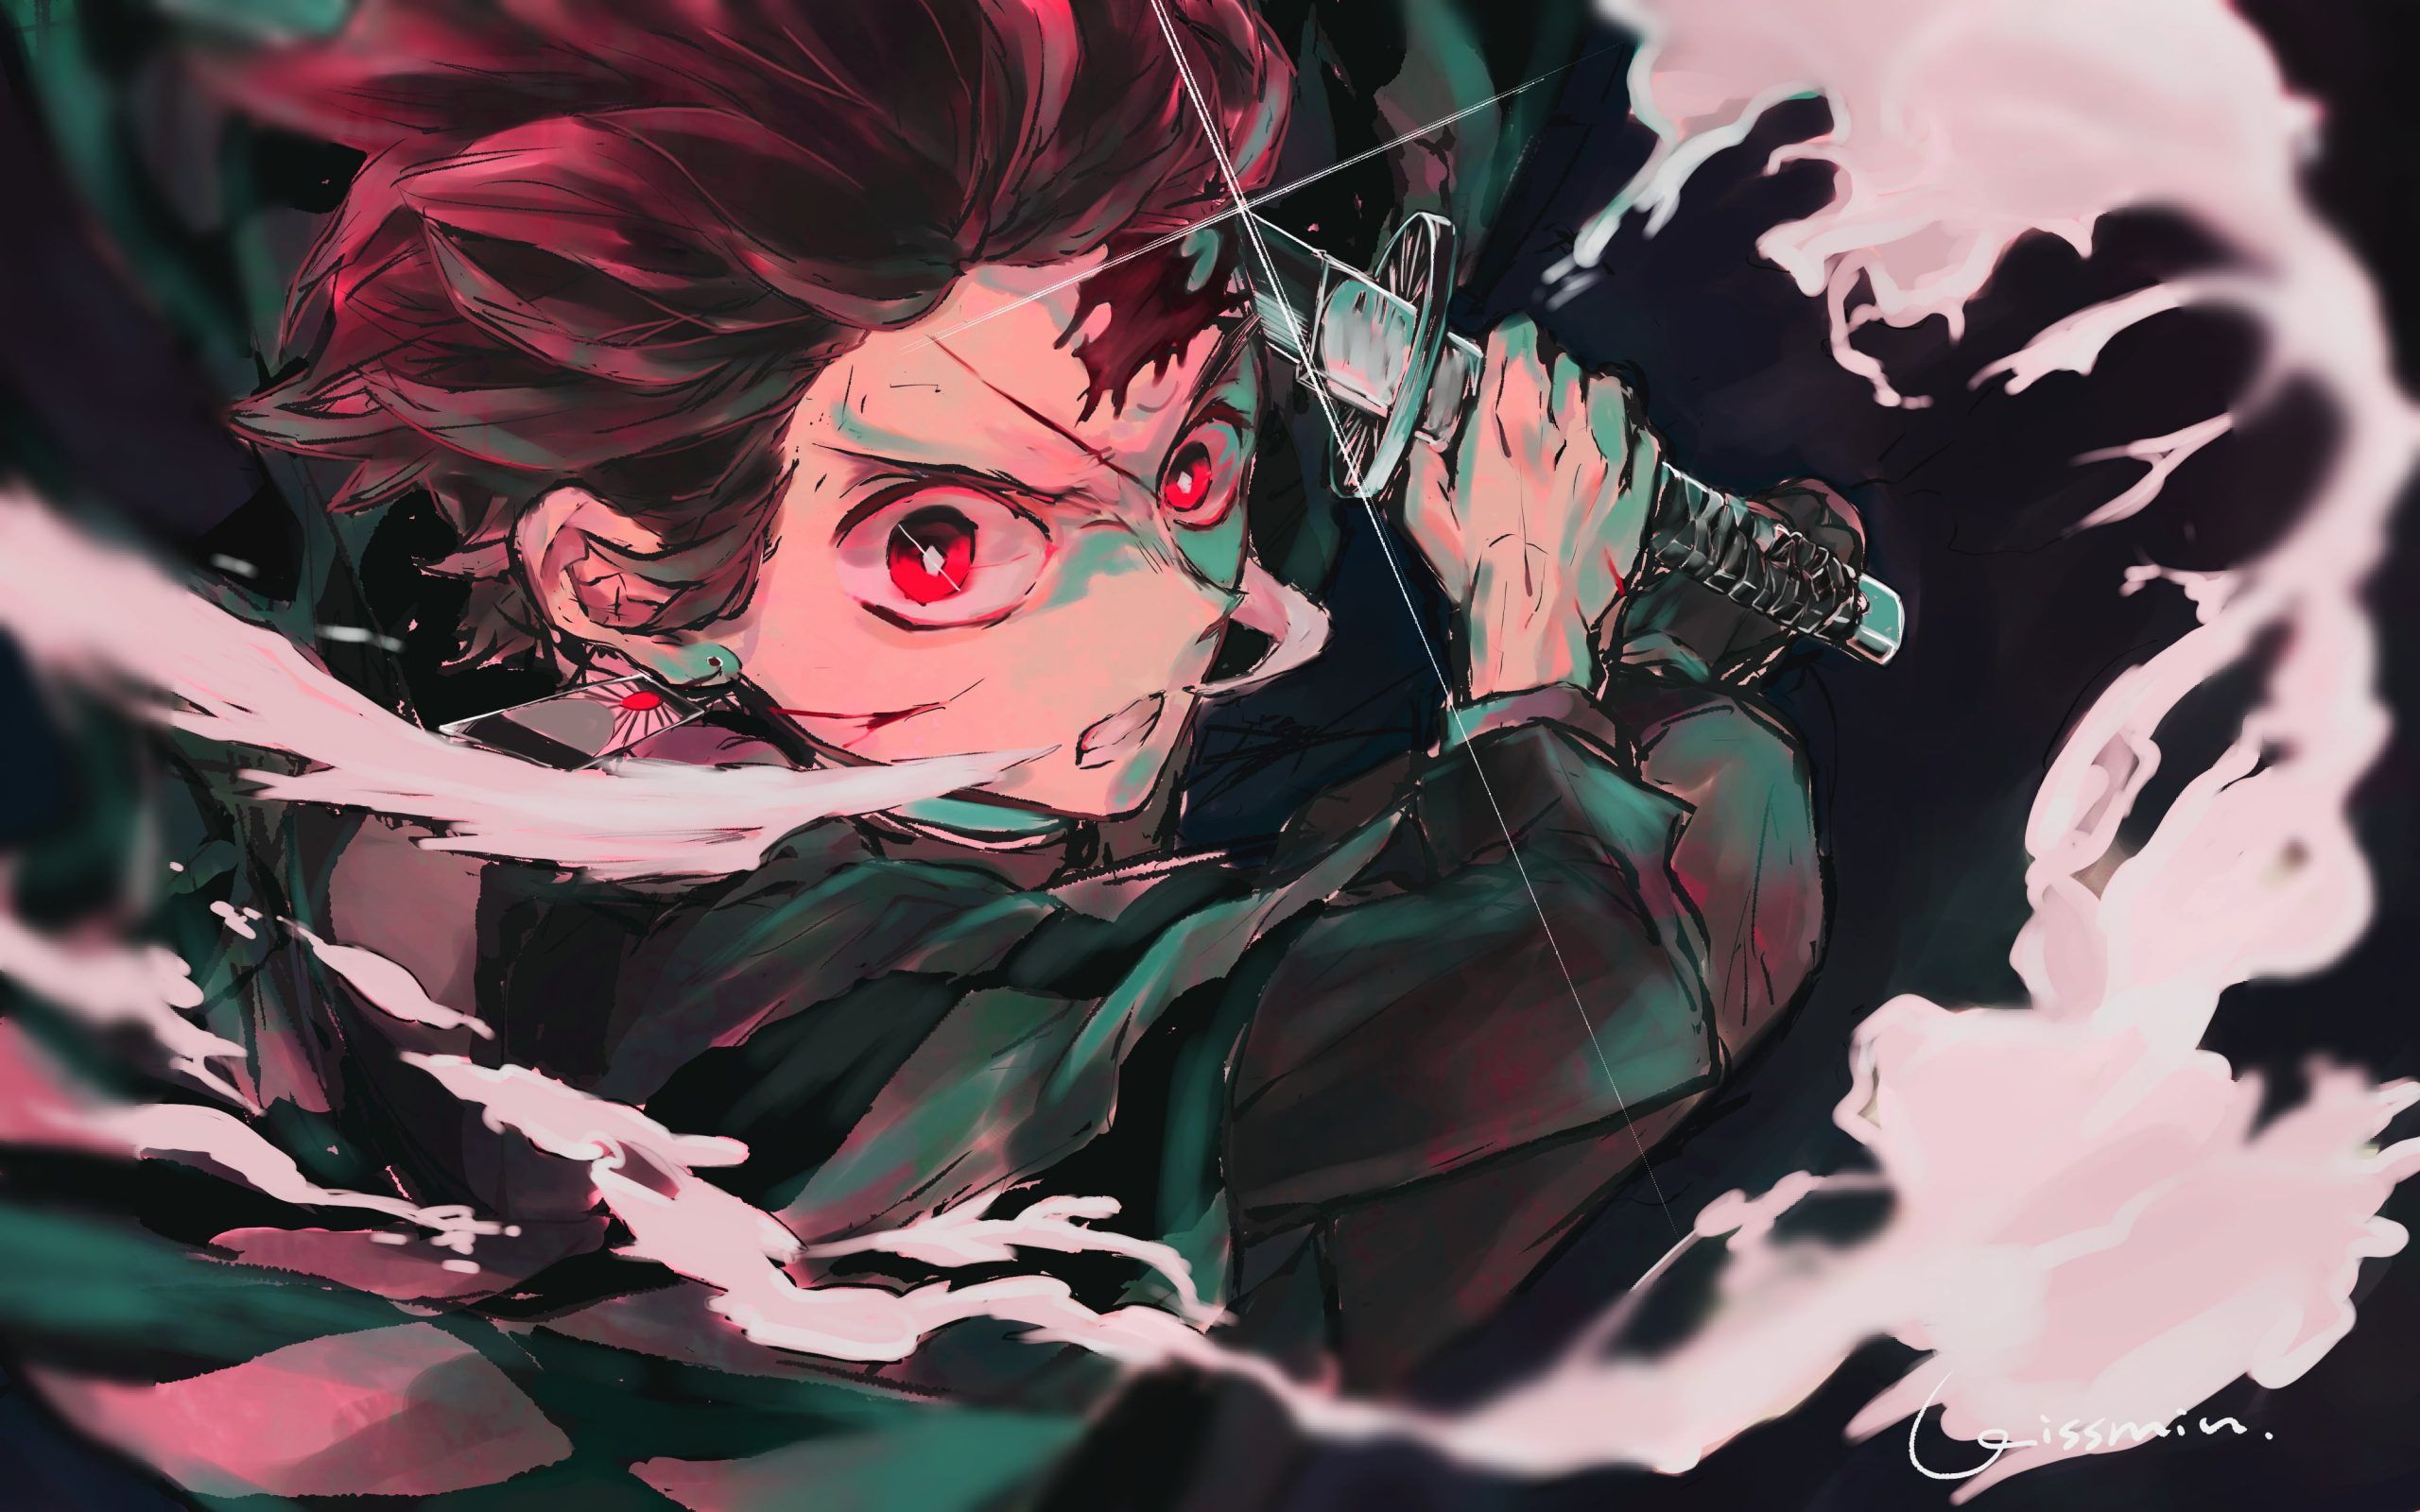 A fanart of Tanjiro from Demon Slayer with his sword and his flames - Demon Slayer